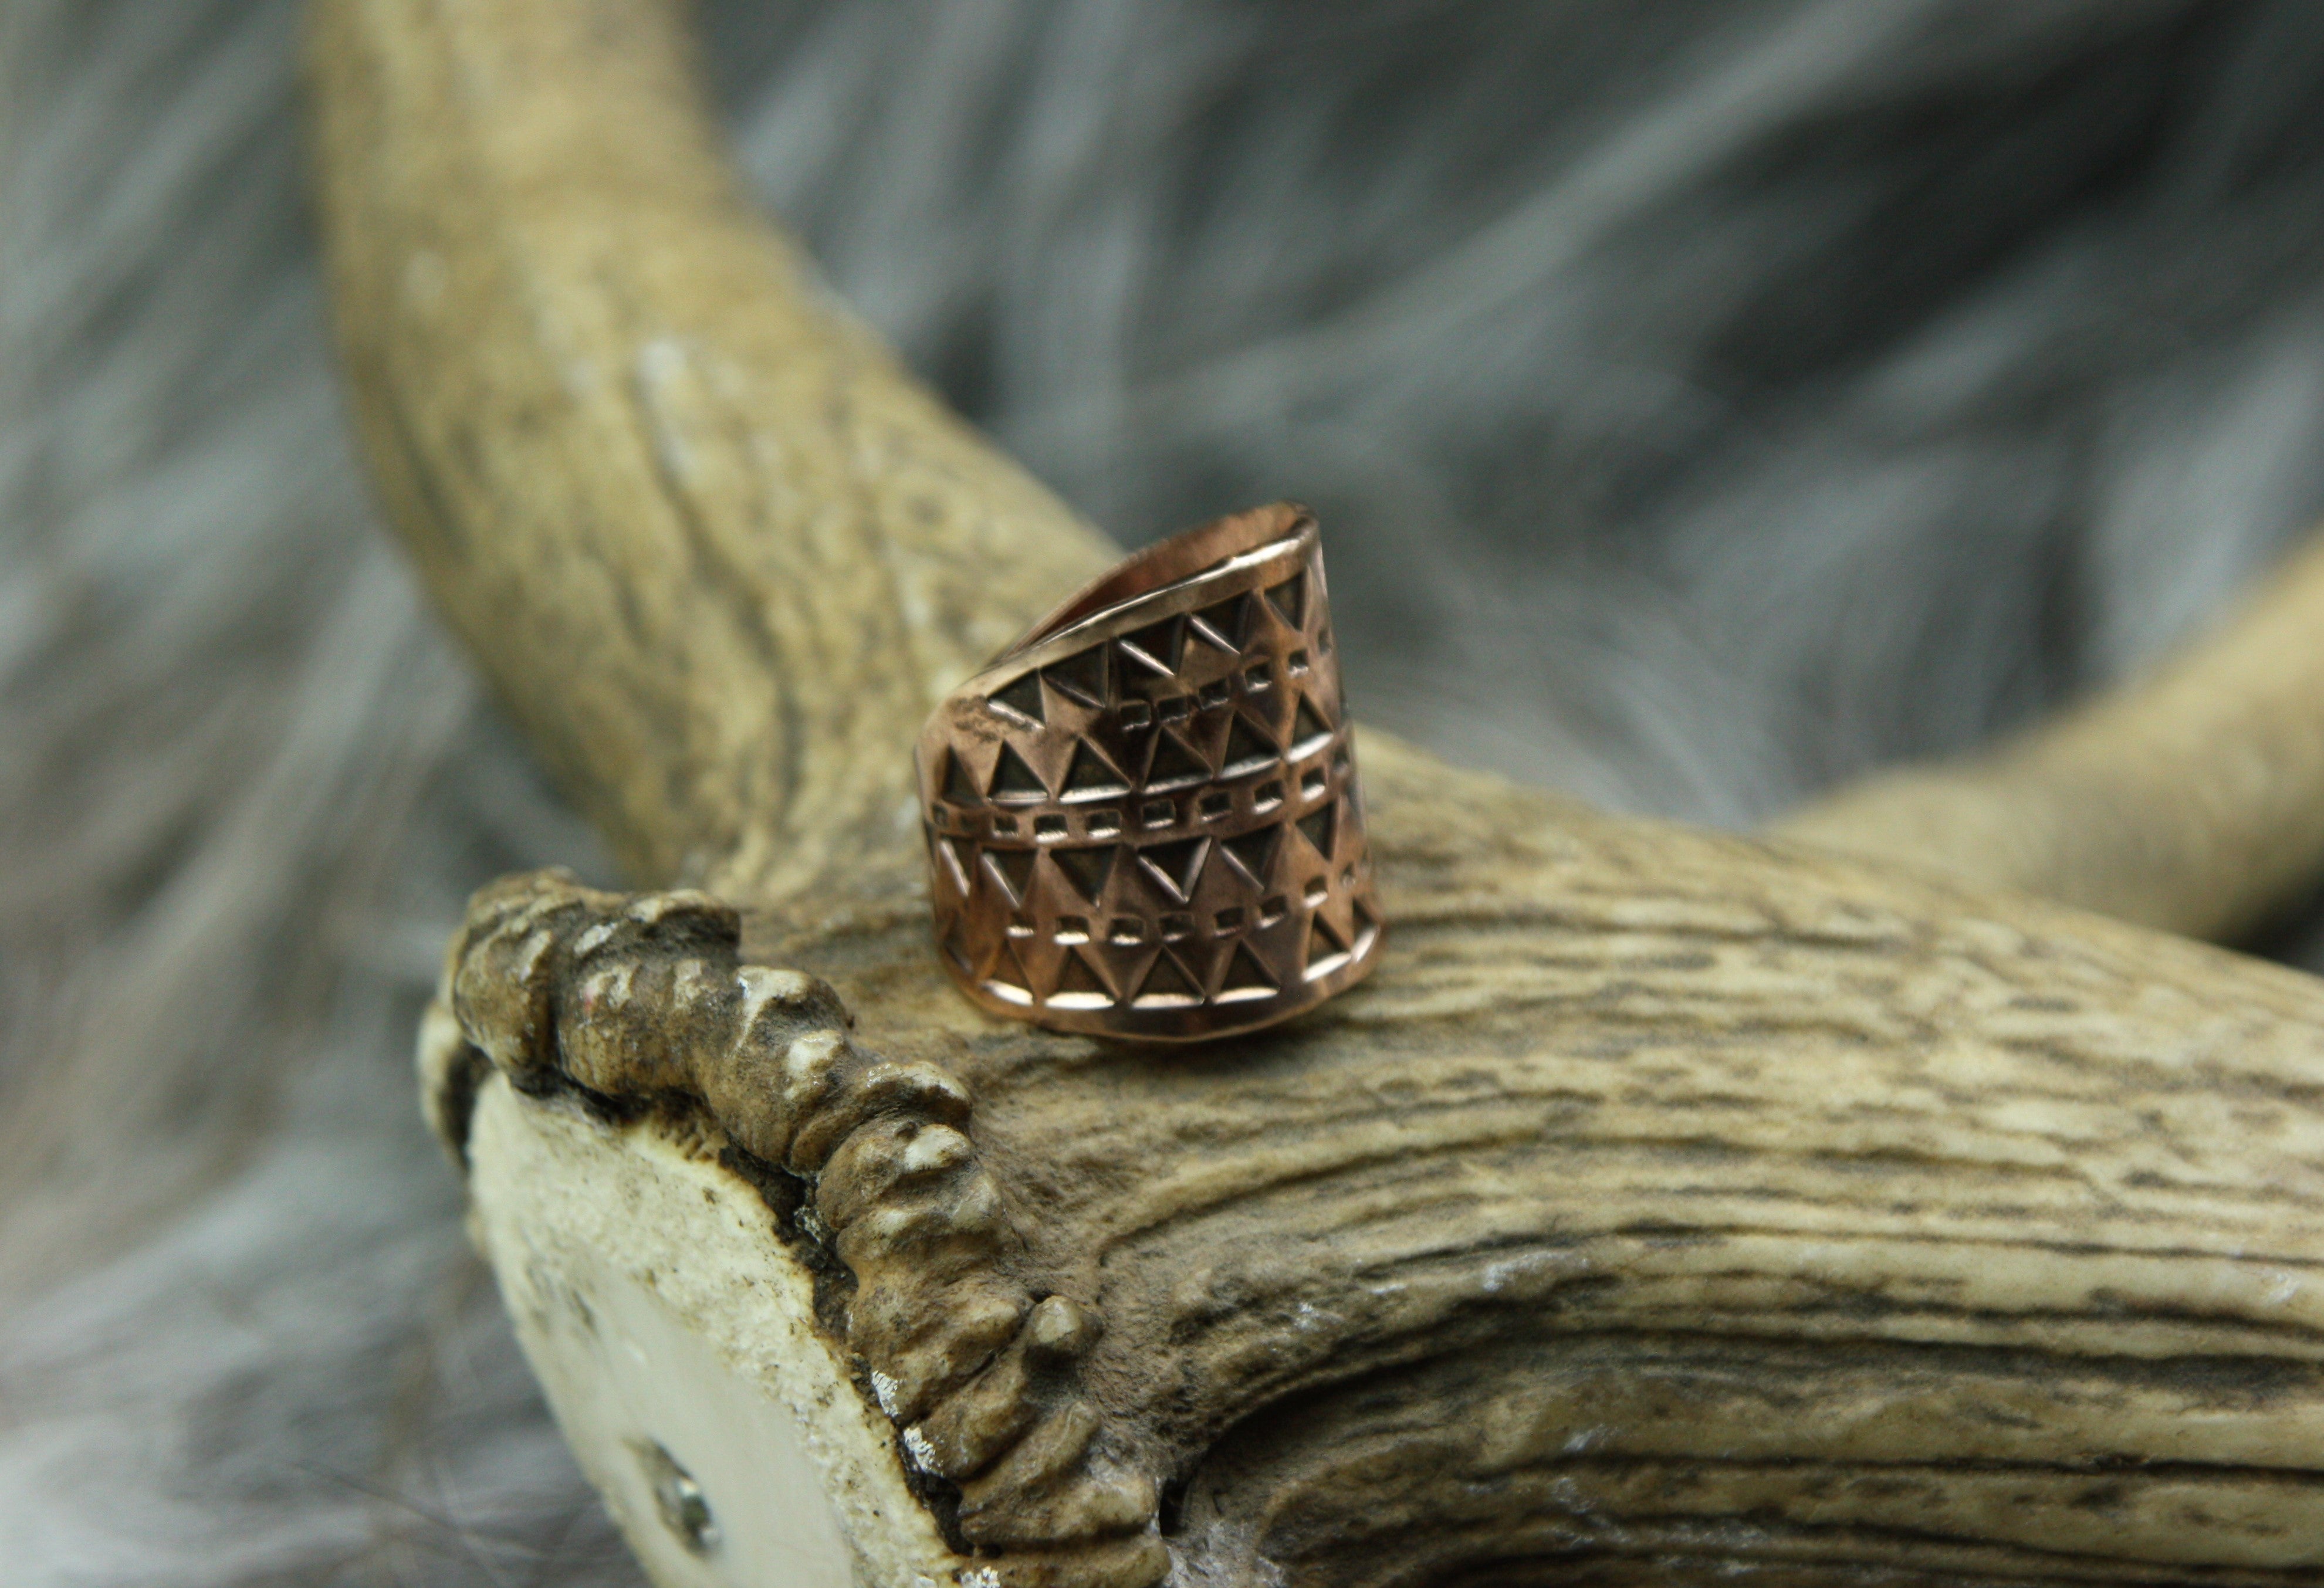 A beautiful Bronze Hand Stamped Ring made in high copper alloy.